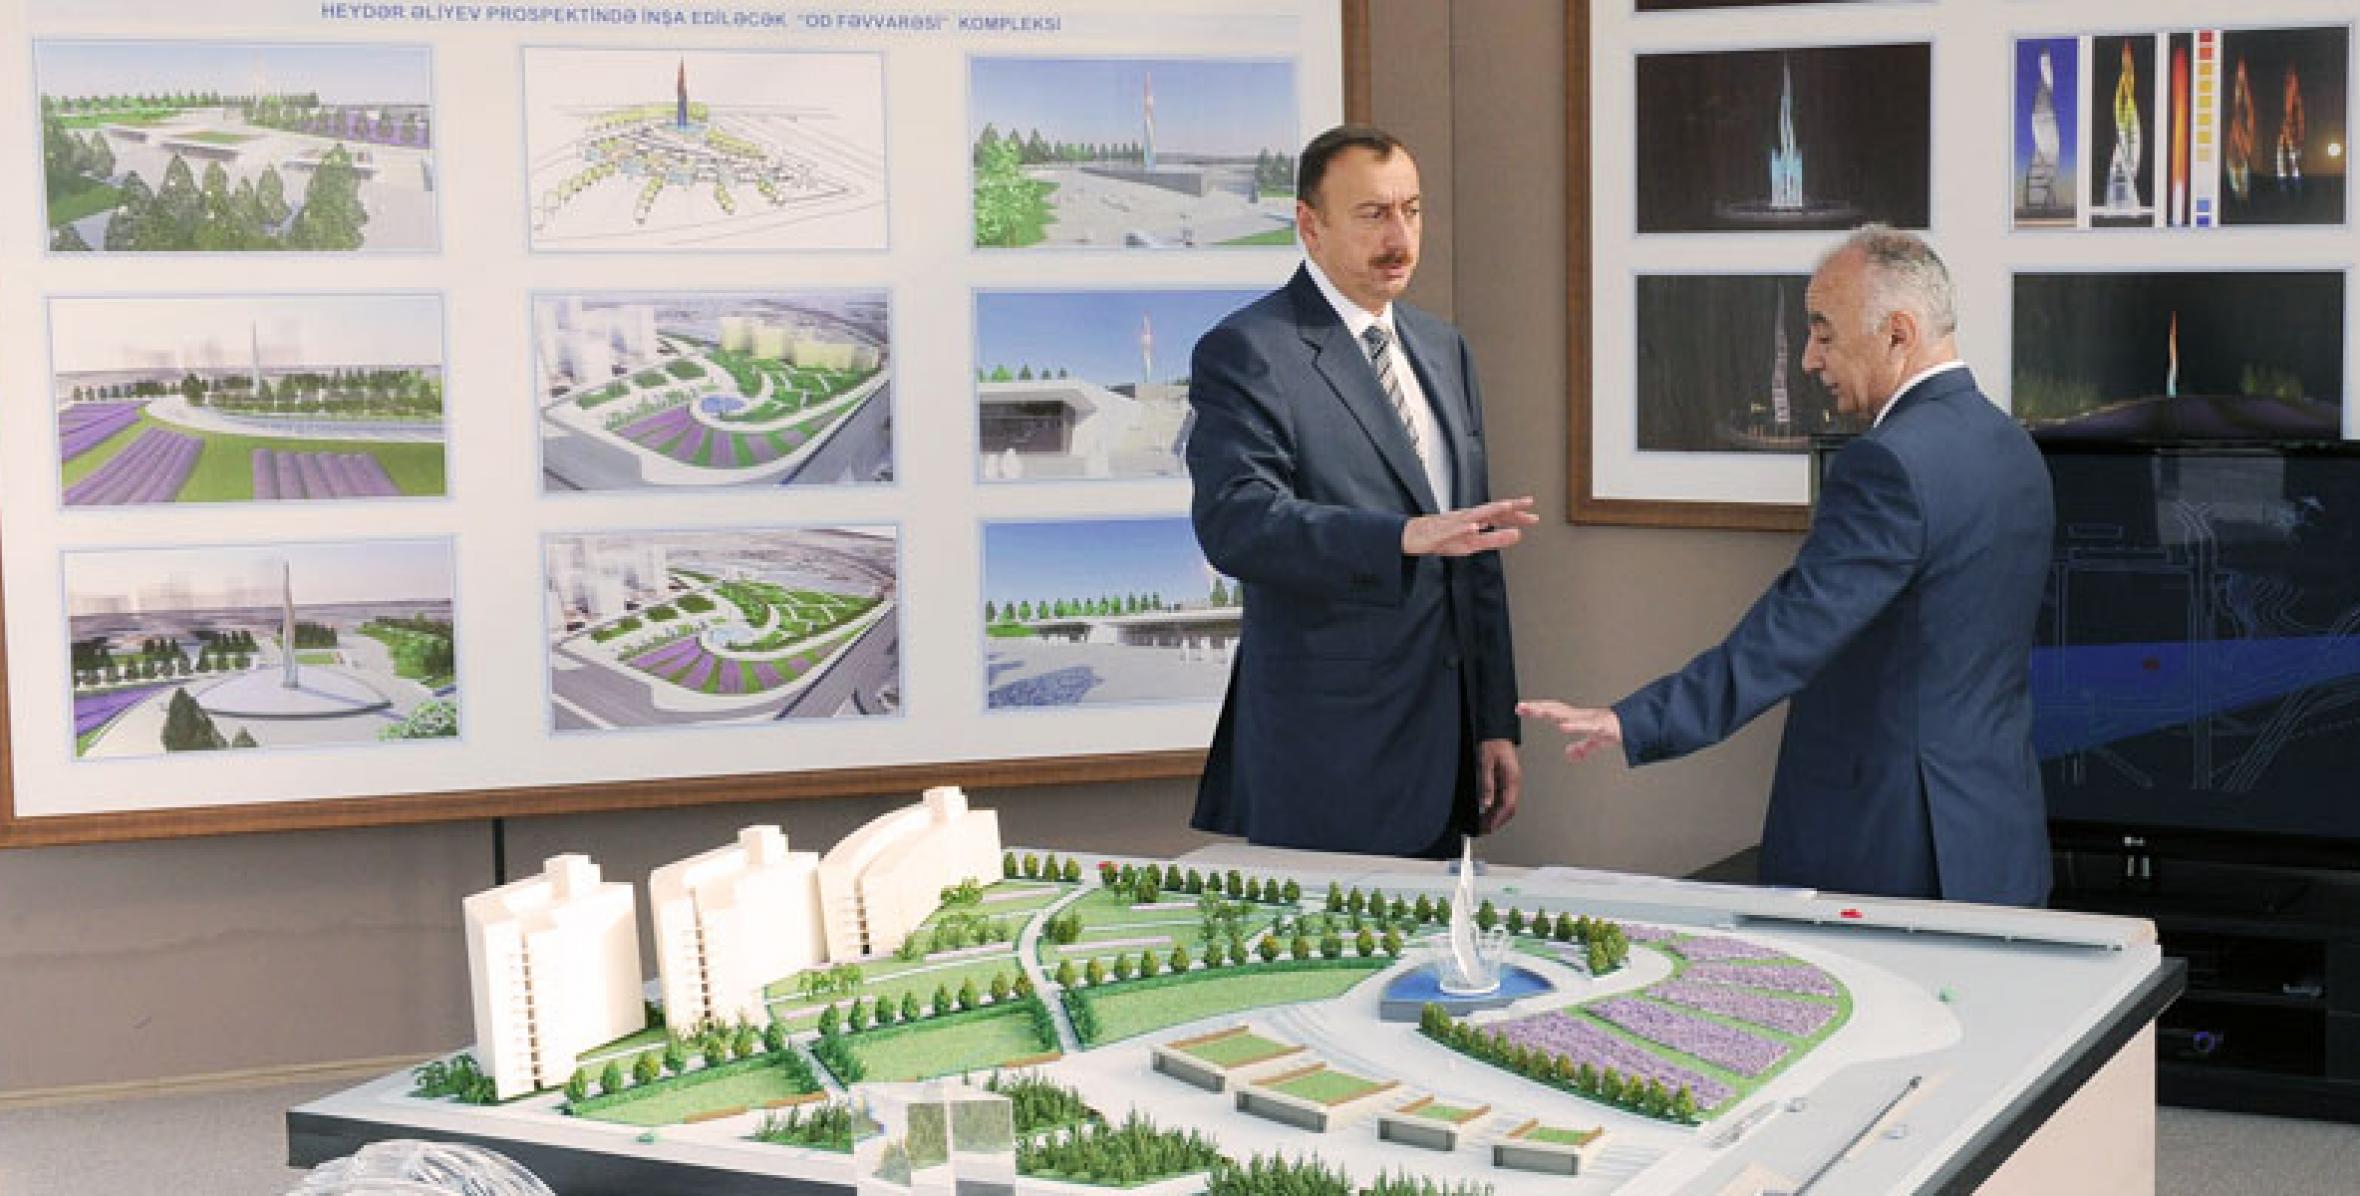 Ilham Aliyev visited the construction site of the new park to be built in Nizami district of Baku